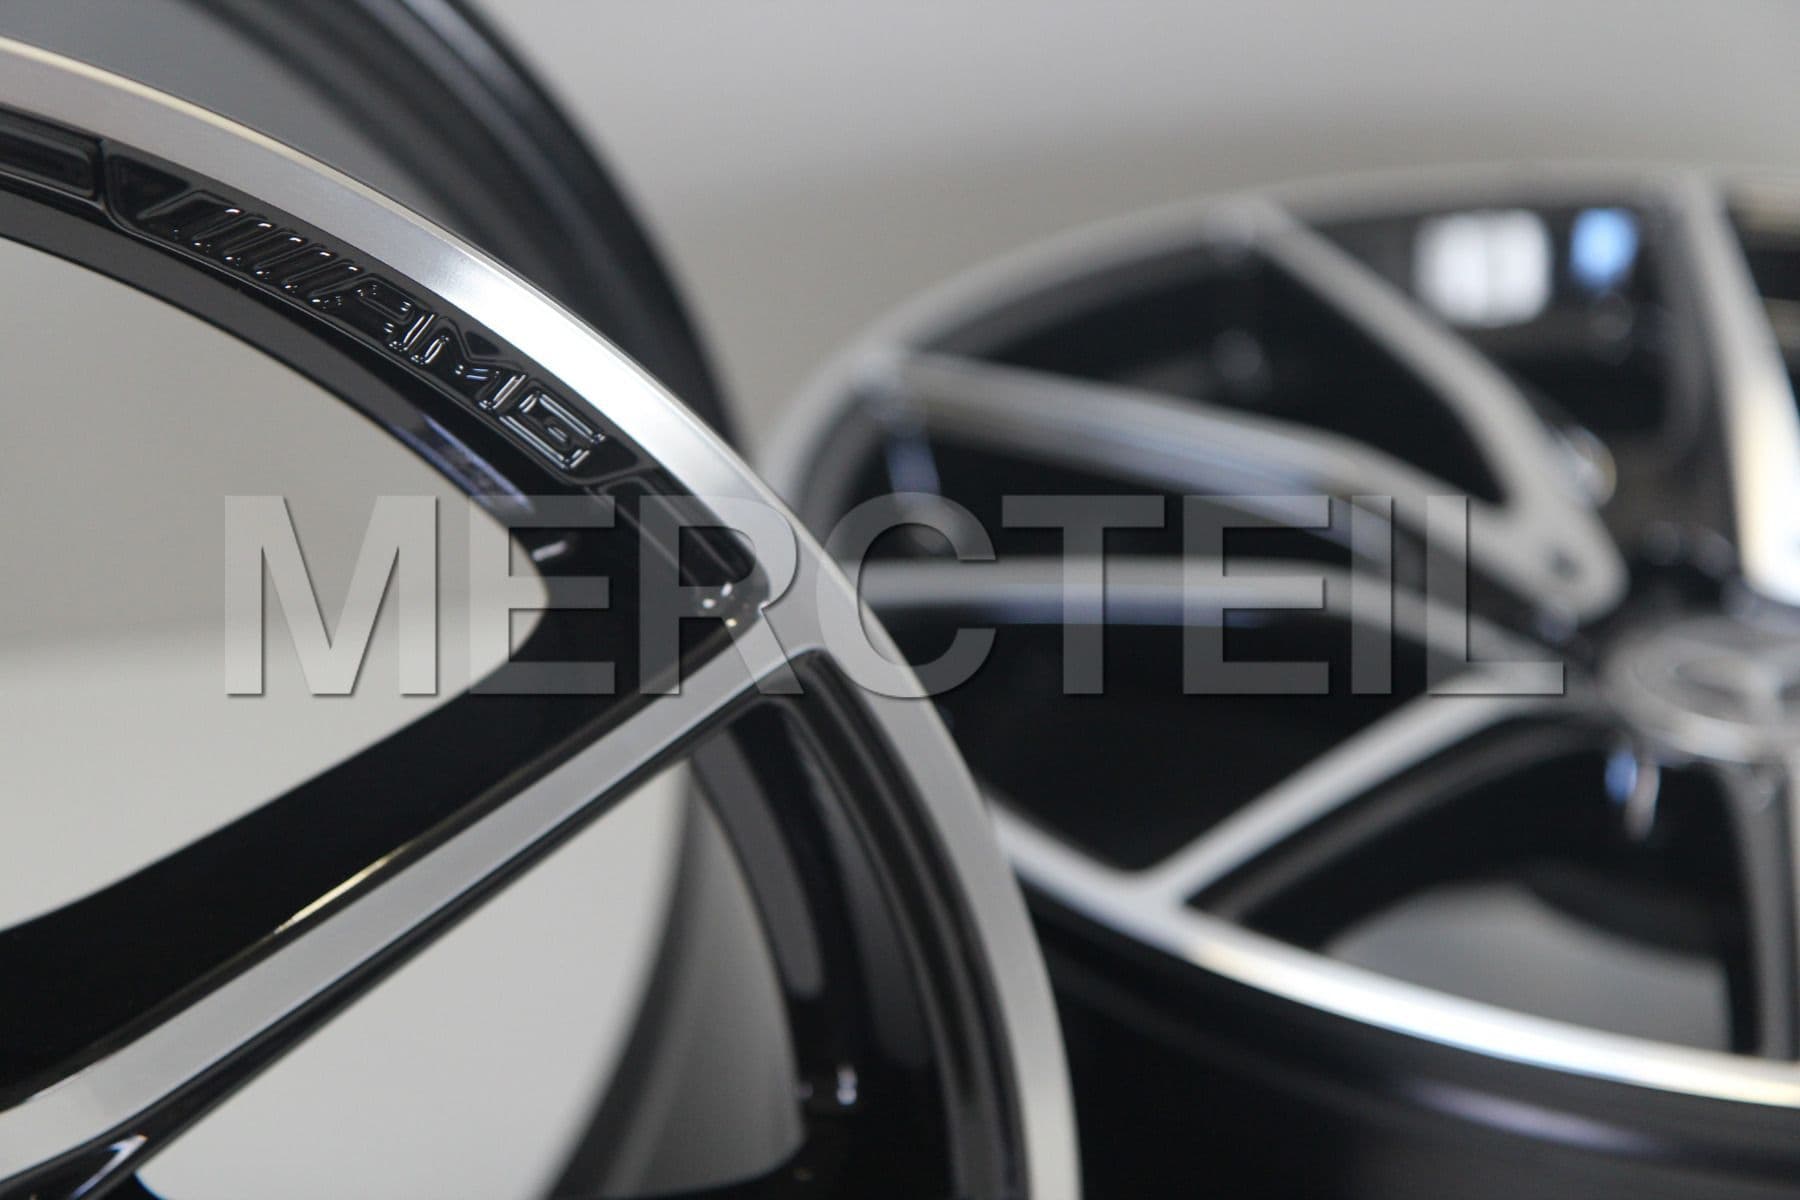 AMG 20 Inch Set Of Alloy Wheels for S Class W222, Coupe C217 AMG Logo on 2 Rims A22240141007X23.